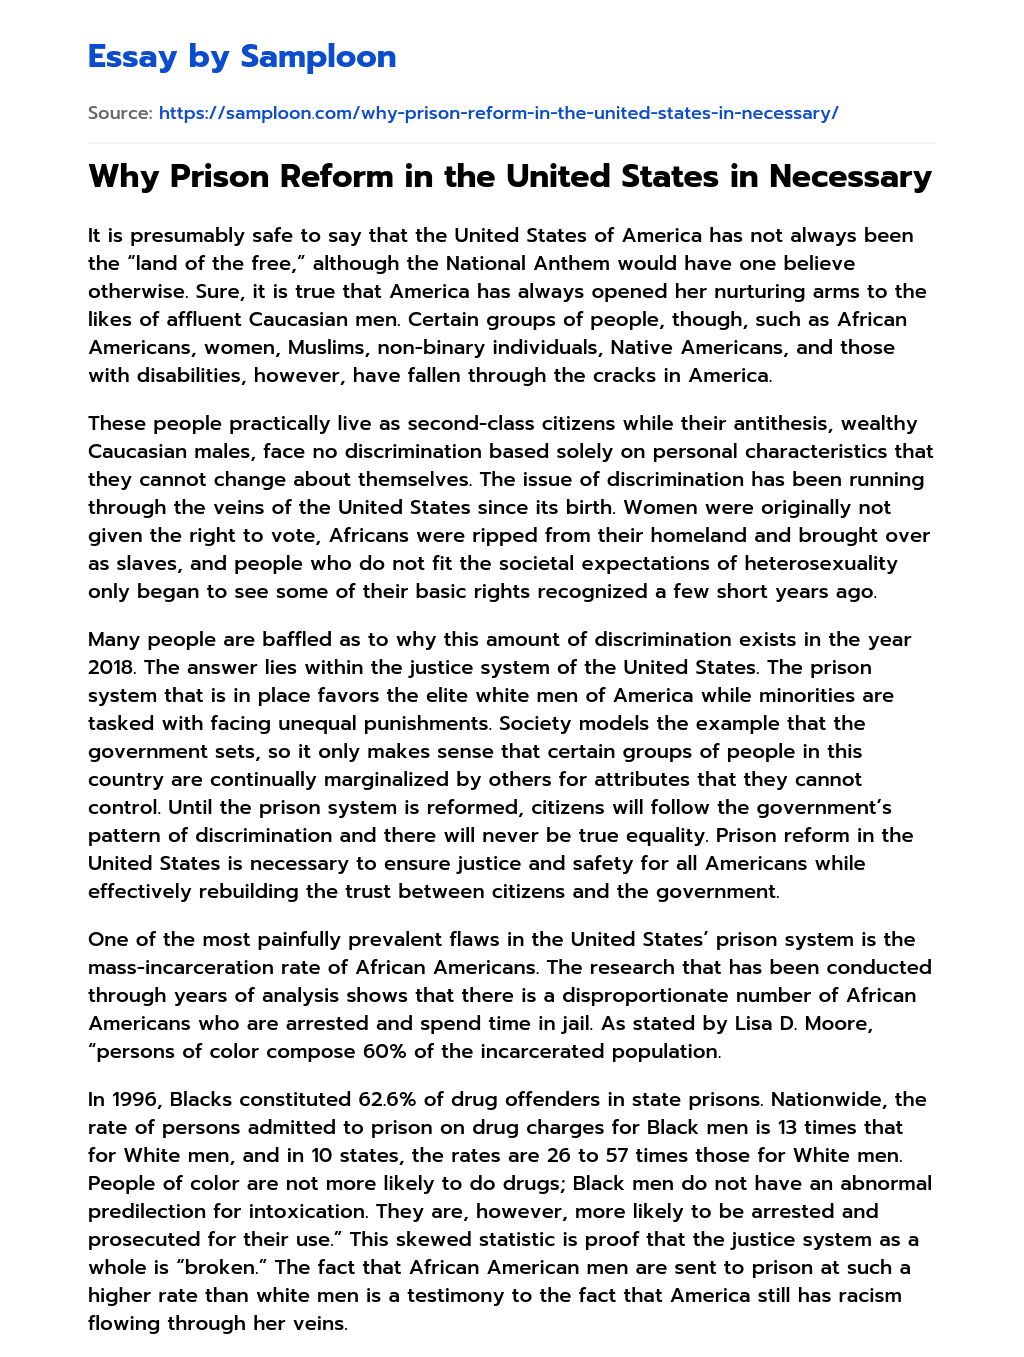 Why Prison Reform in the United States in Necessary essay